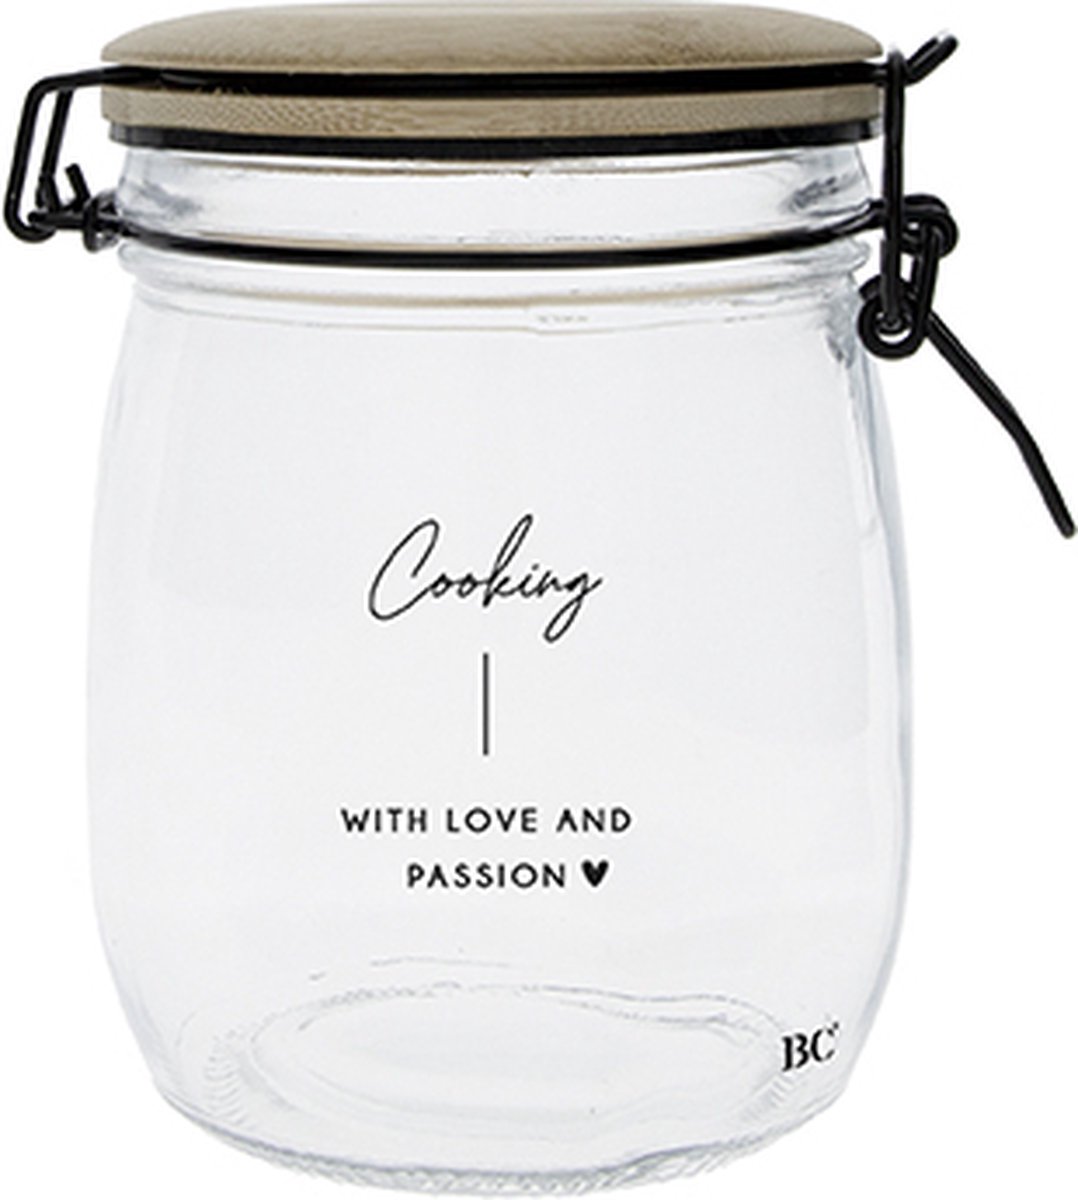 Bastion Collections - Glazen voorraadpot houten deksel - Cooking with love and passion